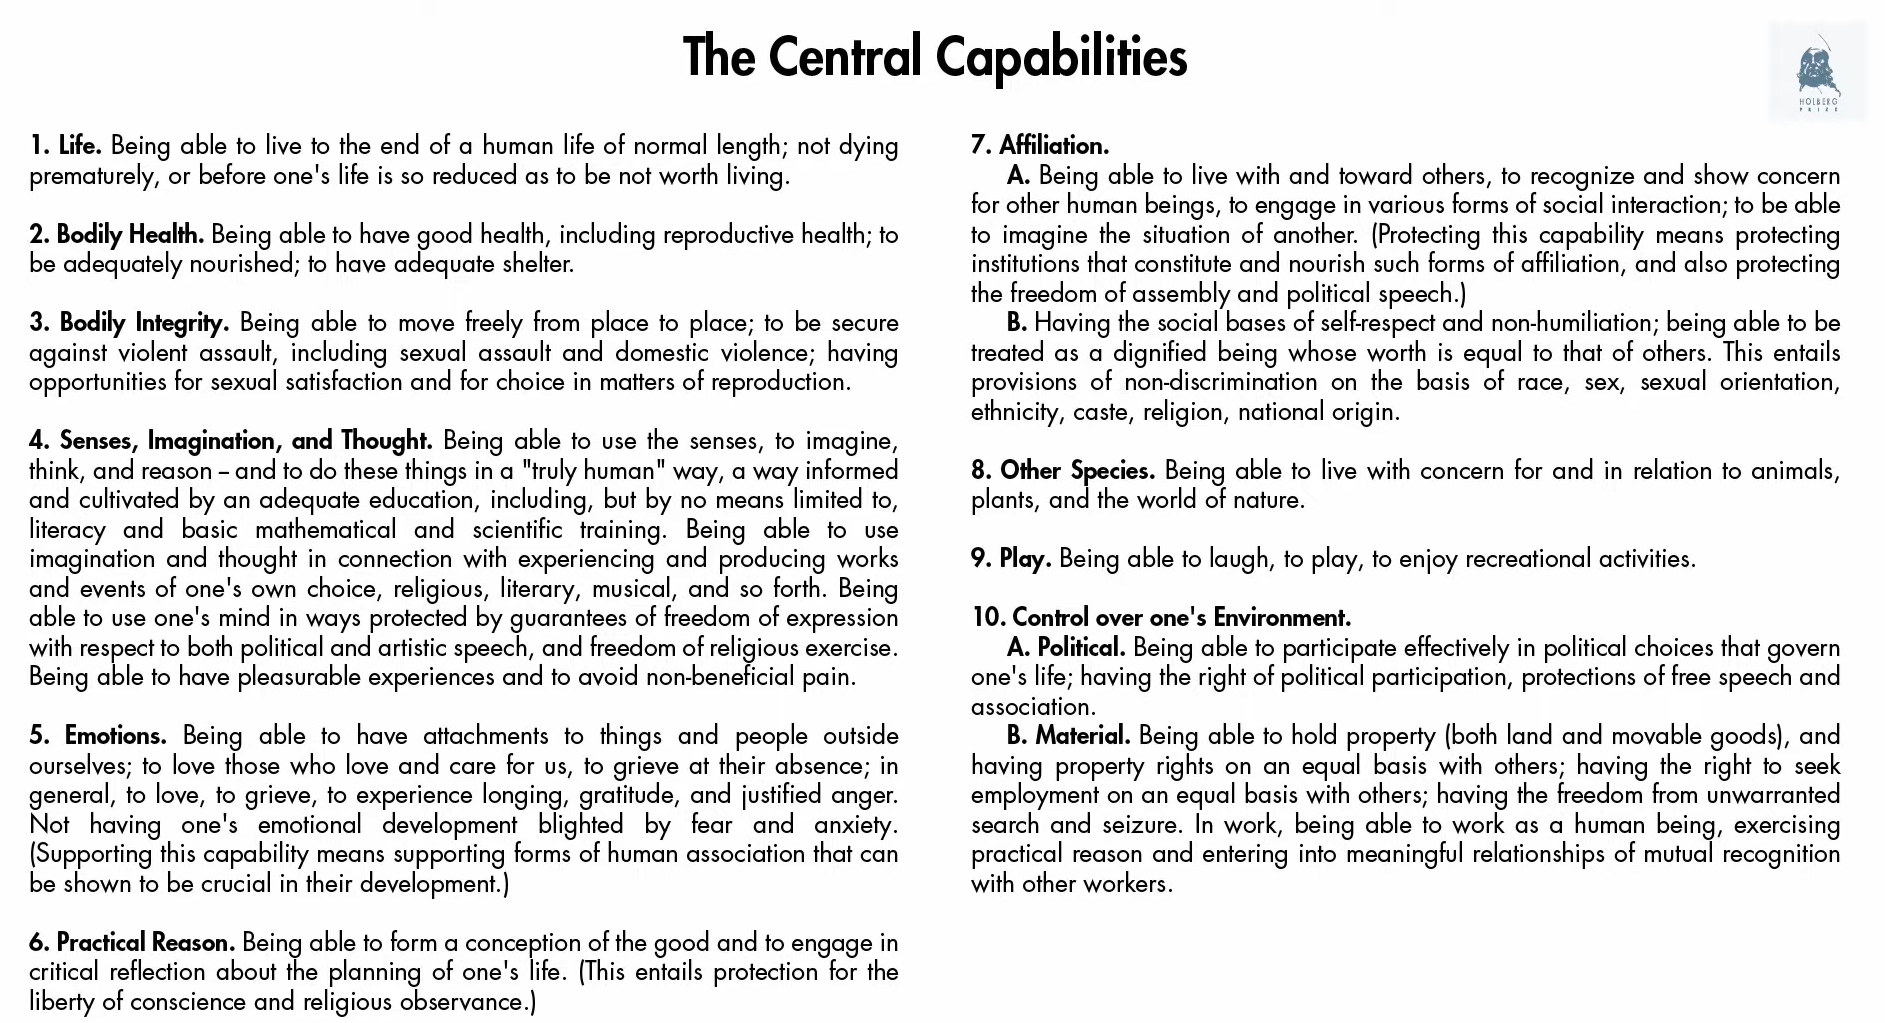 The Central Capabilities